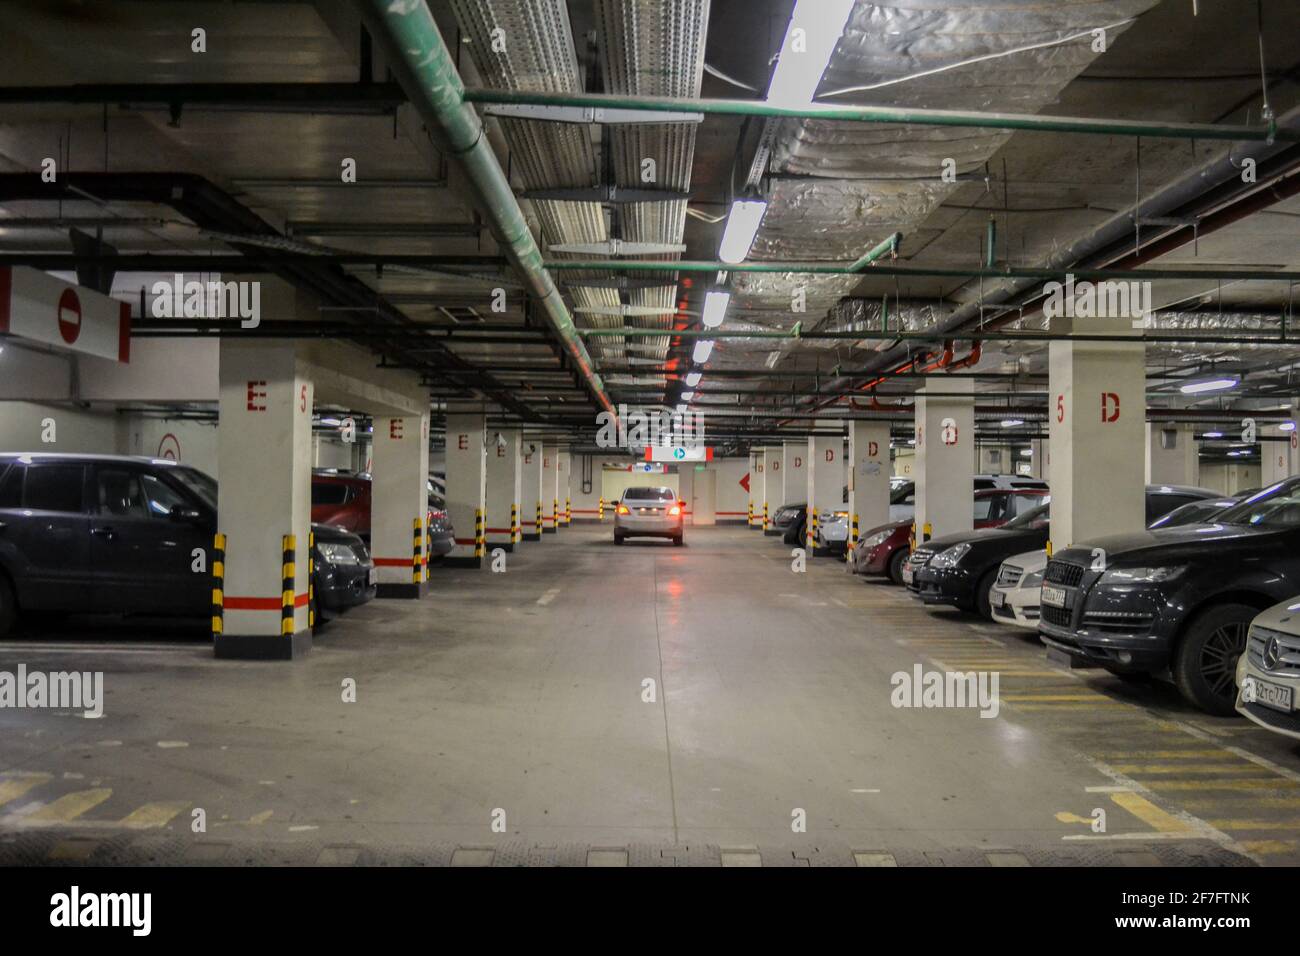 Design recommendations for multi-storey and underground car parks